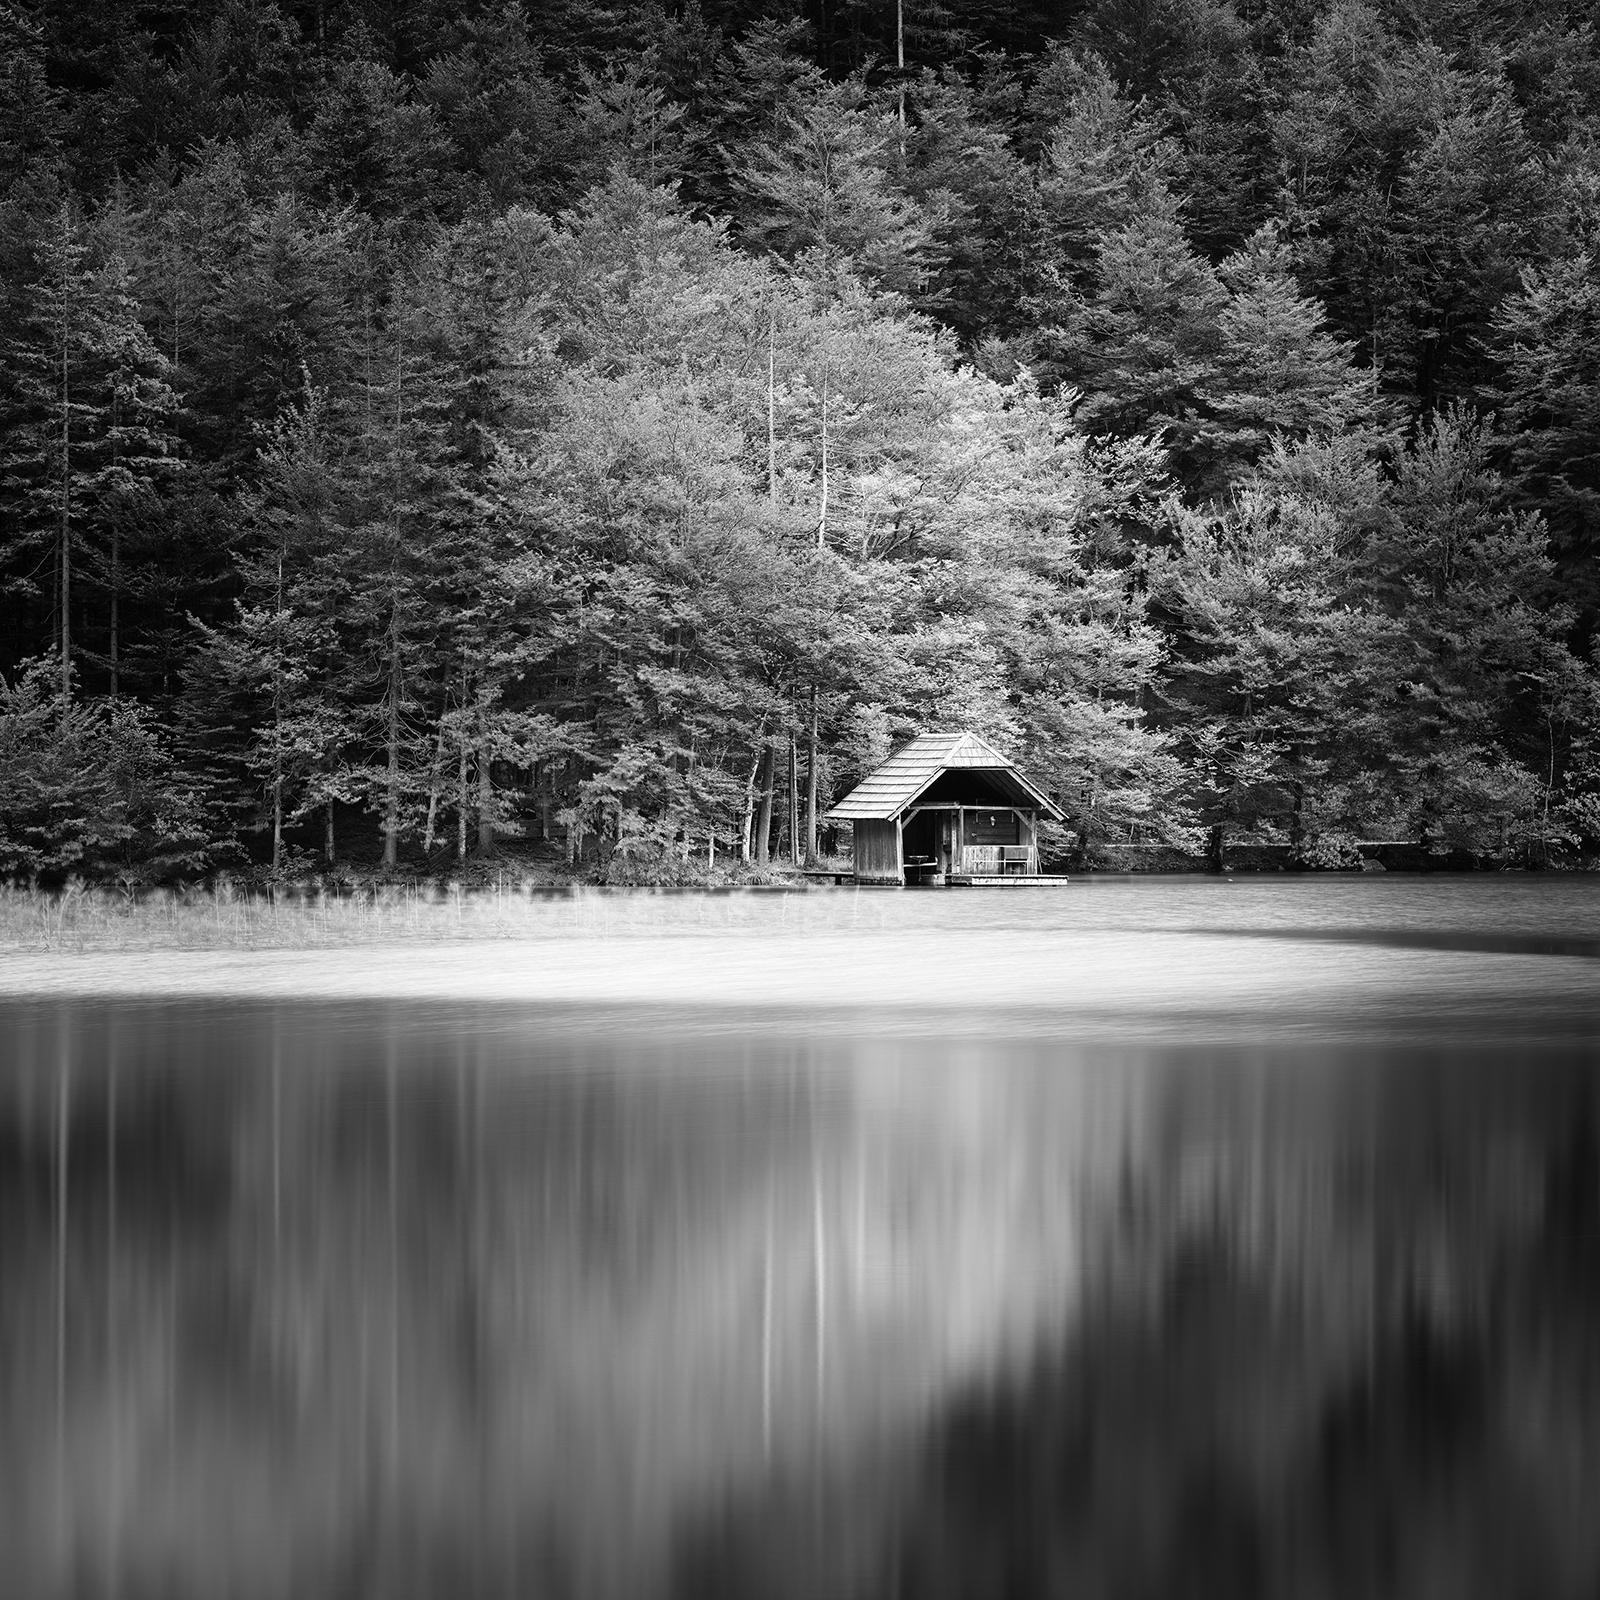 Black and white fine art long exposure waterscape - landscape photography. Archival pigment ink print as part of a limited edition of 5. All Gerald Berghammer prints are made to order in limited editions on Hahnemuehle Photo Rag Baryta. Each print